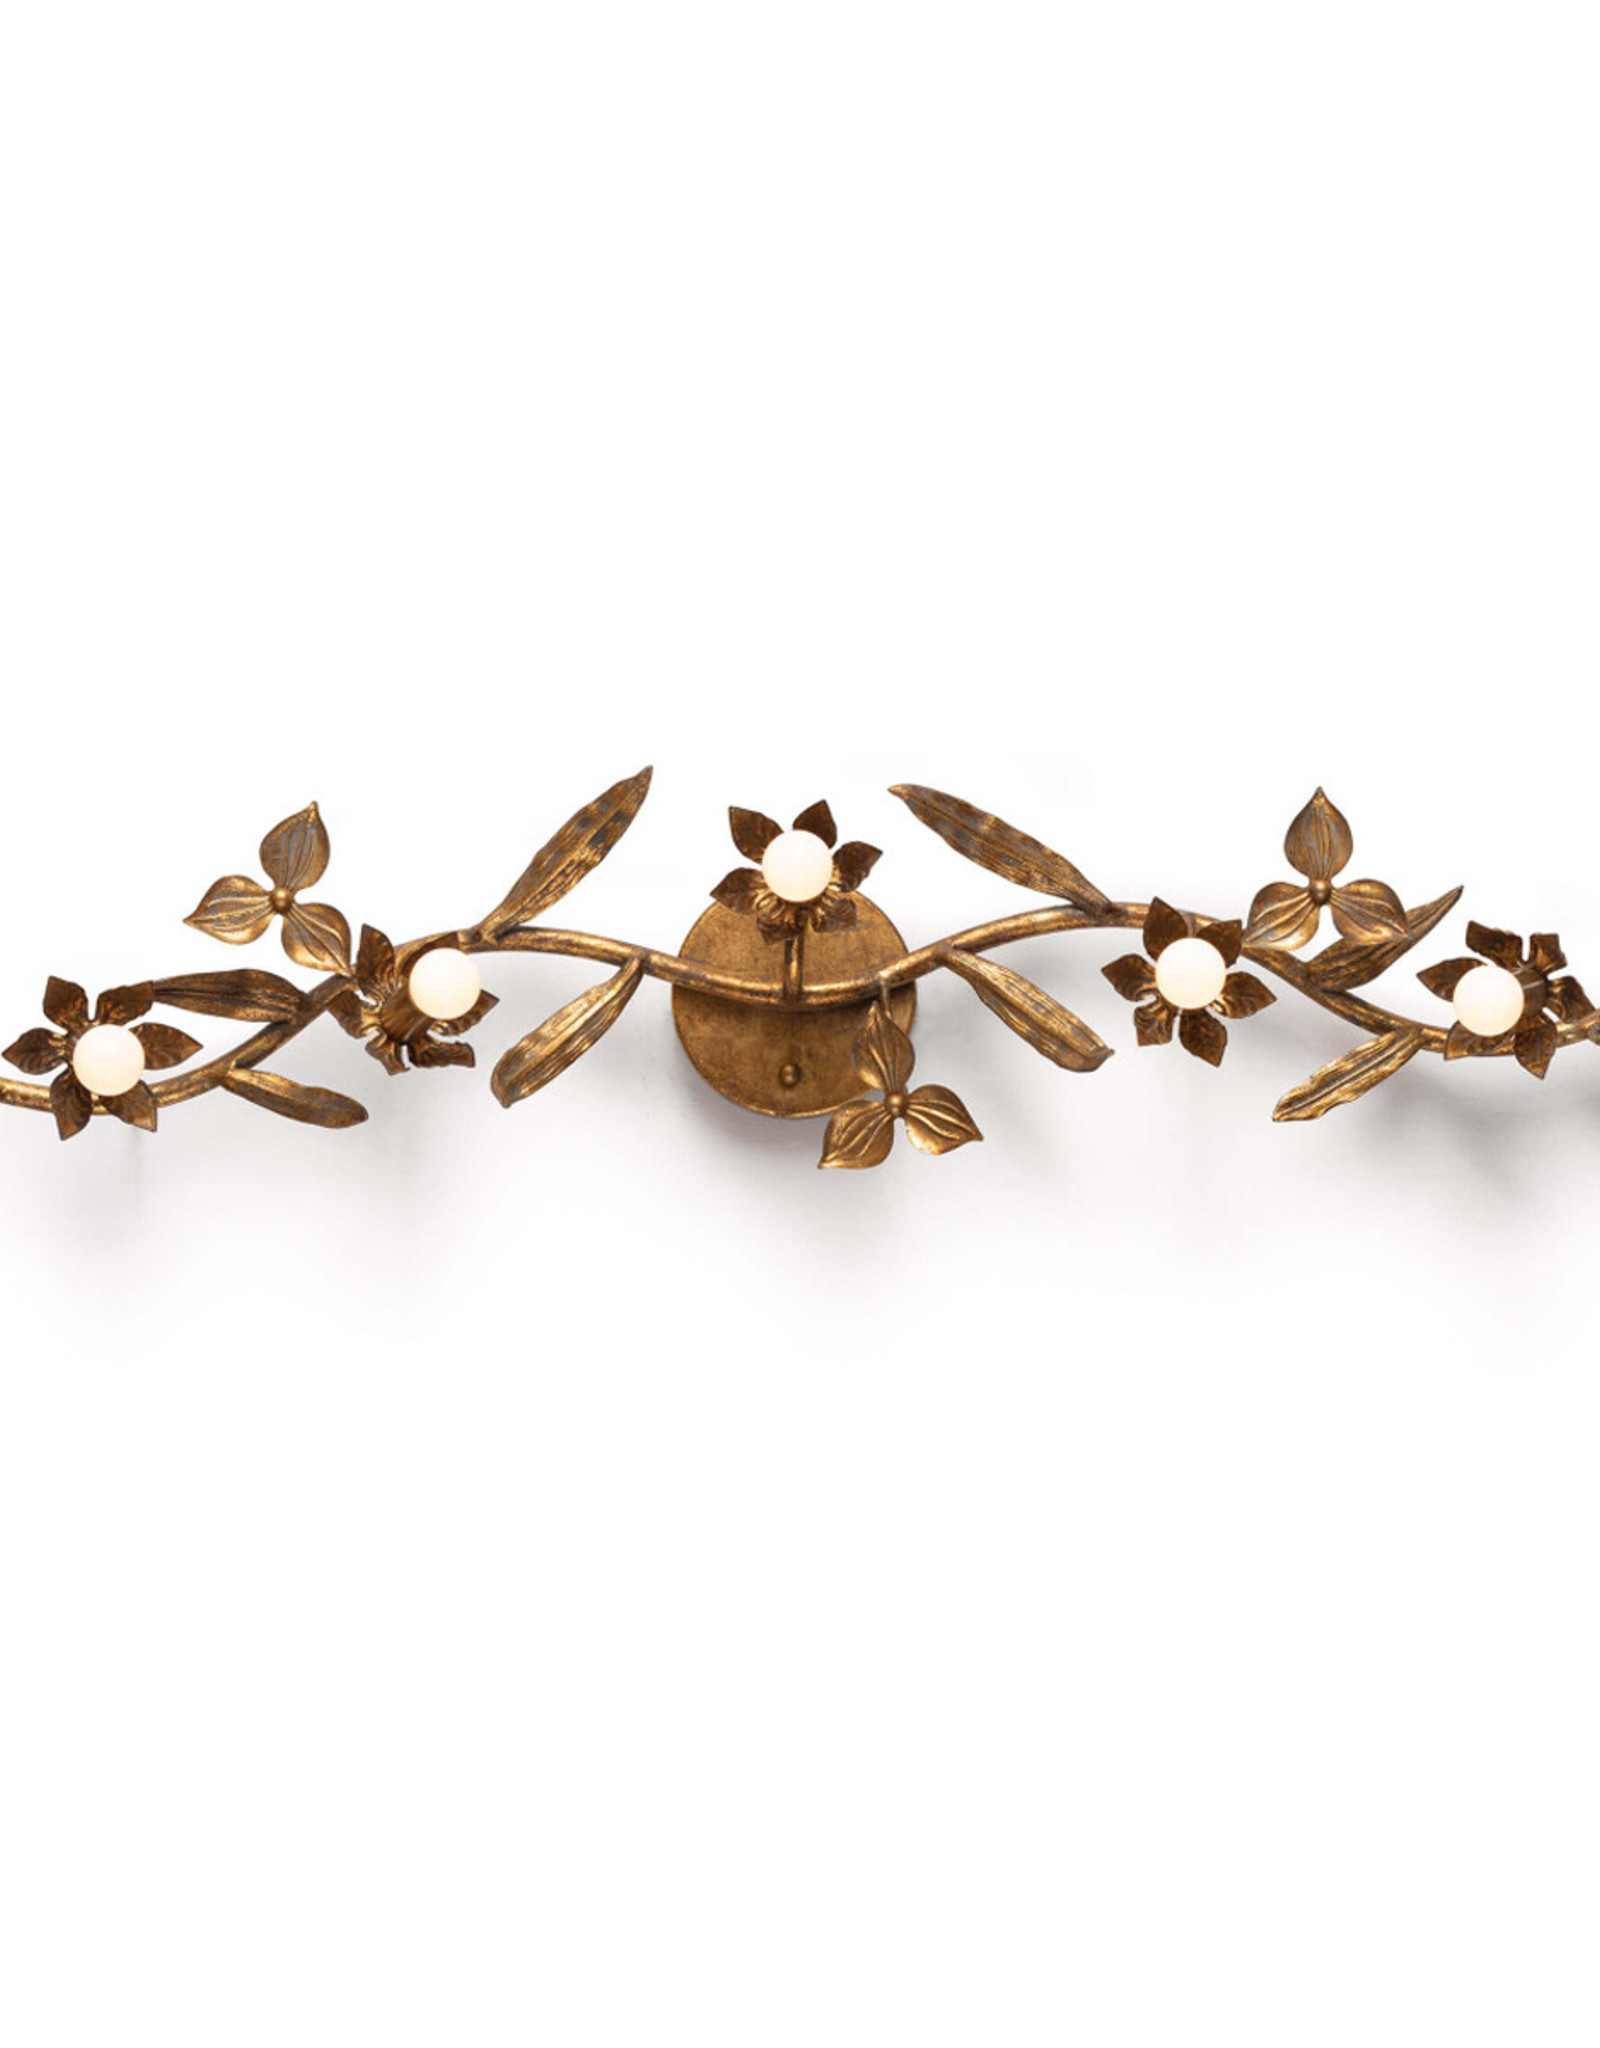 Southern Living Trillium Sconce